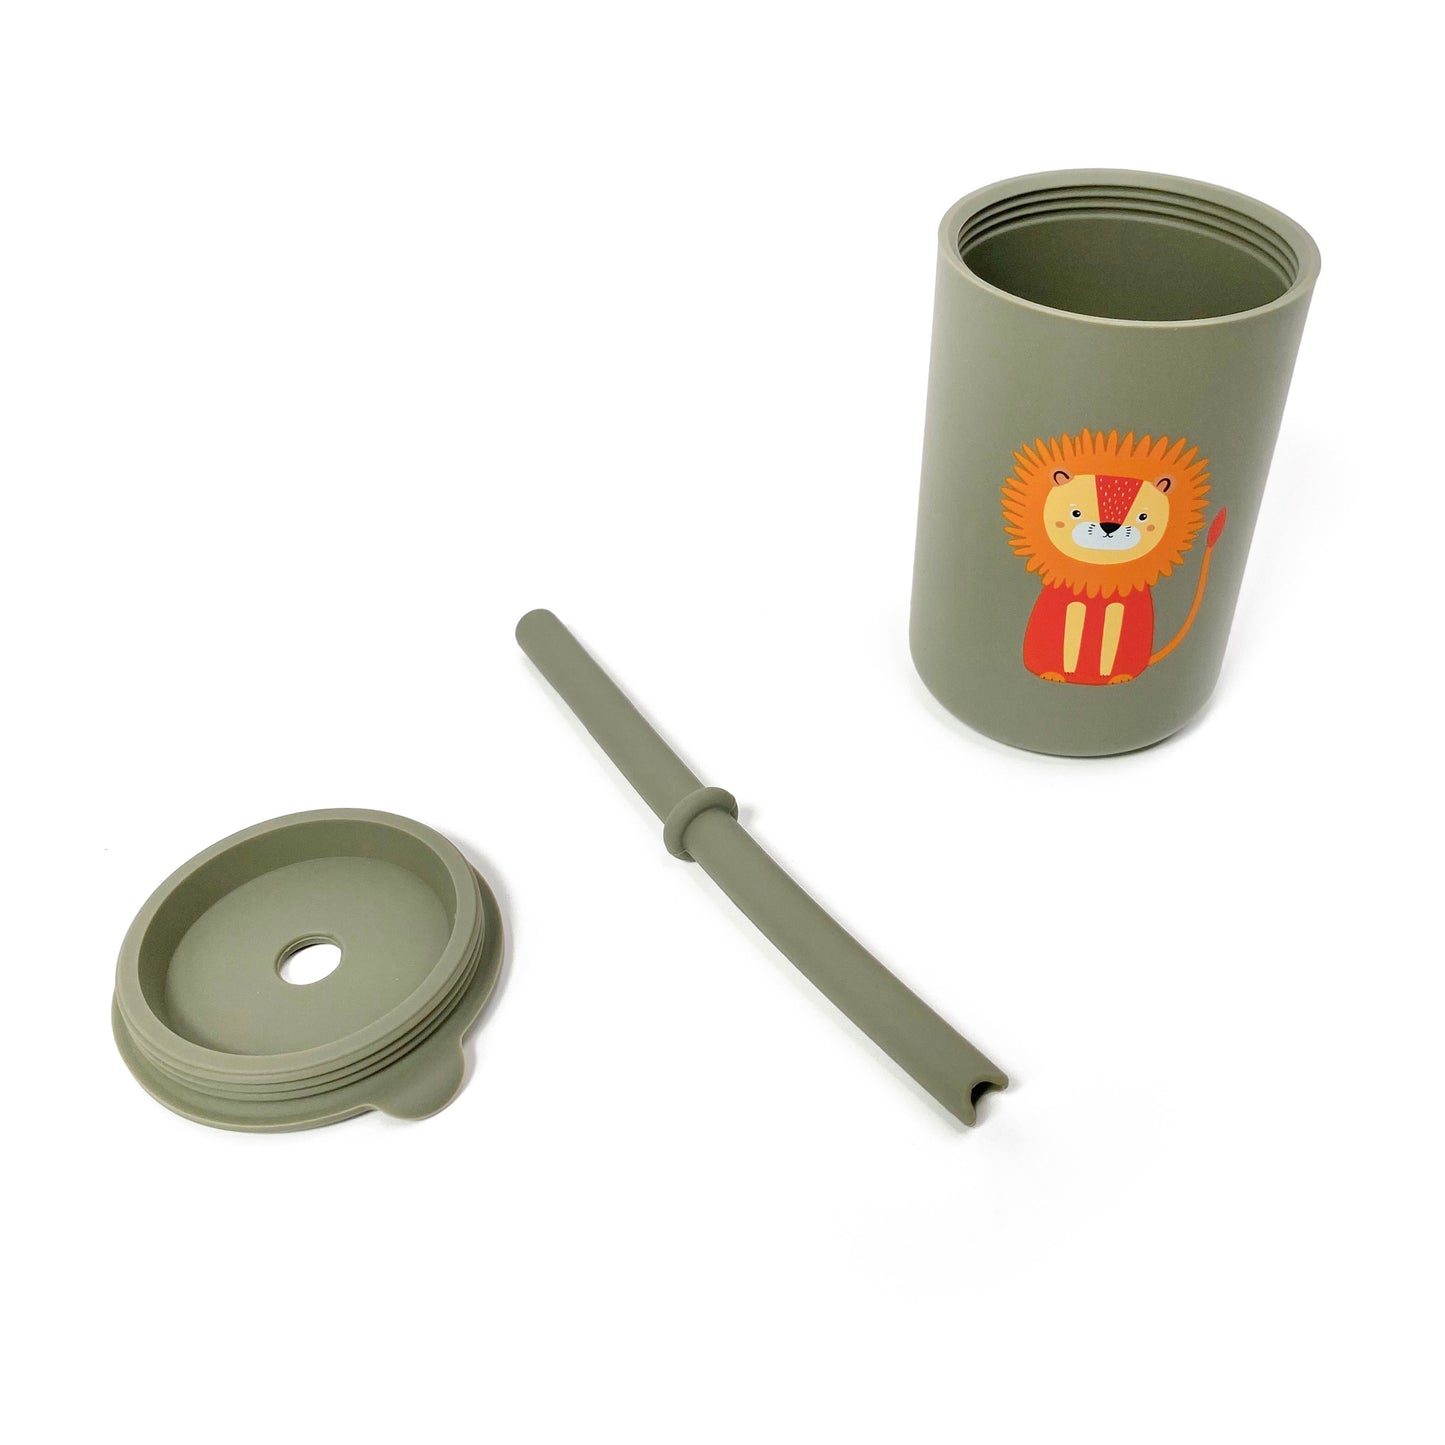 A children’s green silicone drinking cup, with matching lid and straw, featuring a lion design. The image shows the cup, lid and straw separately.